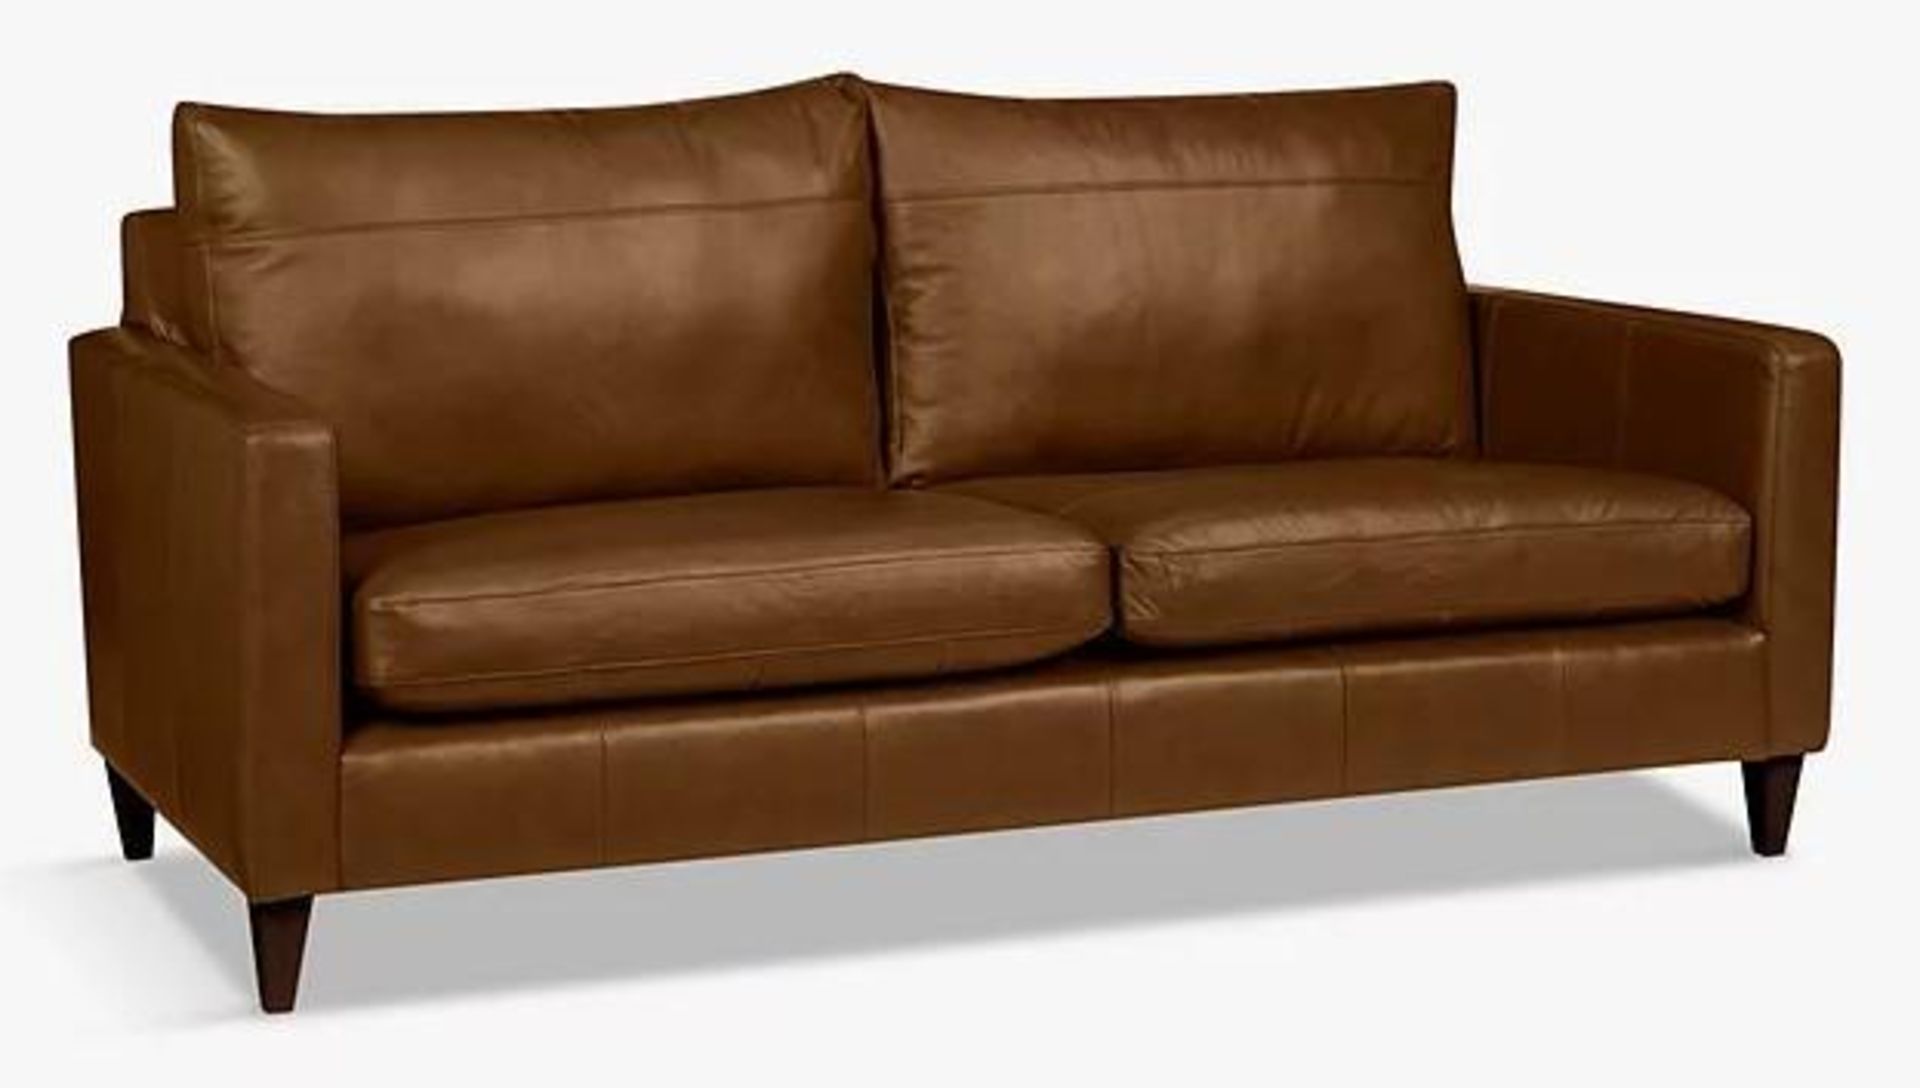 BRAND NEW John Lewis Bailey full leather 2 seater sofa in Tan. RRP: £1,599.00 - Image 3 of 4